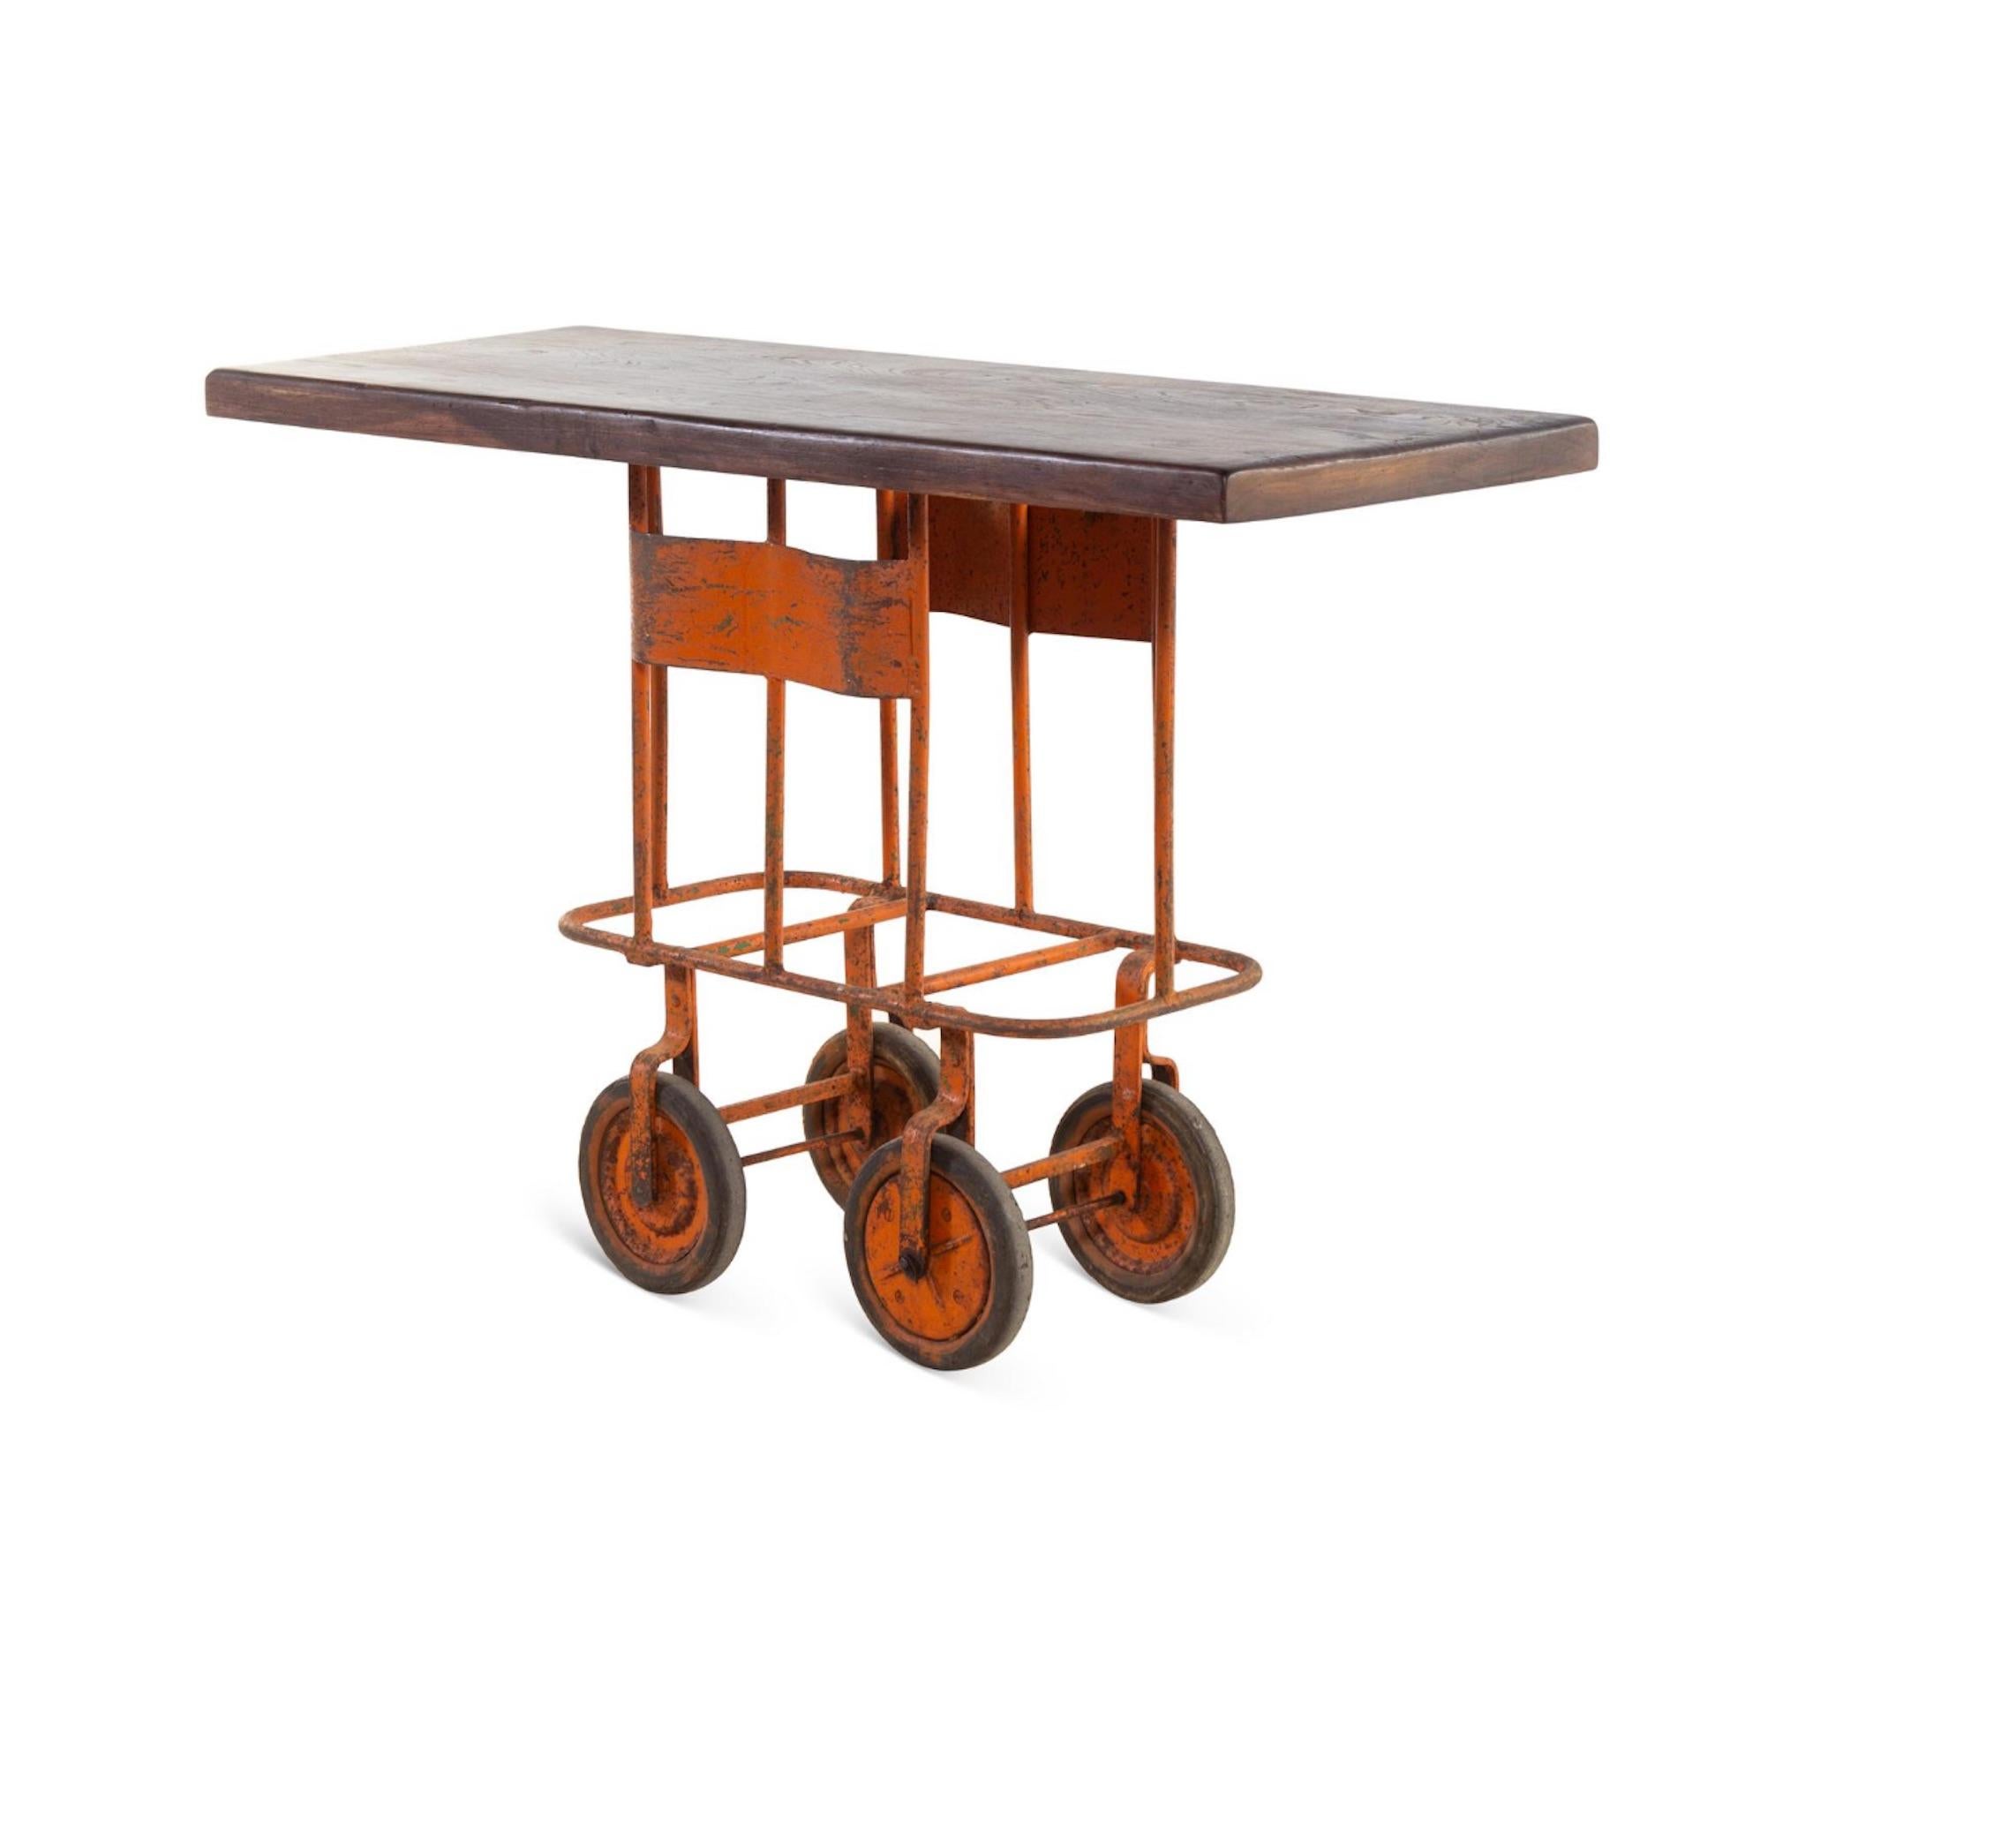 Industrial cart base converted into Kitchen Island or bar cart. Great color. Perfect amount of wear/patina.